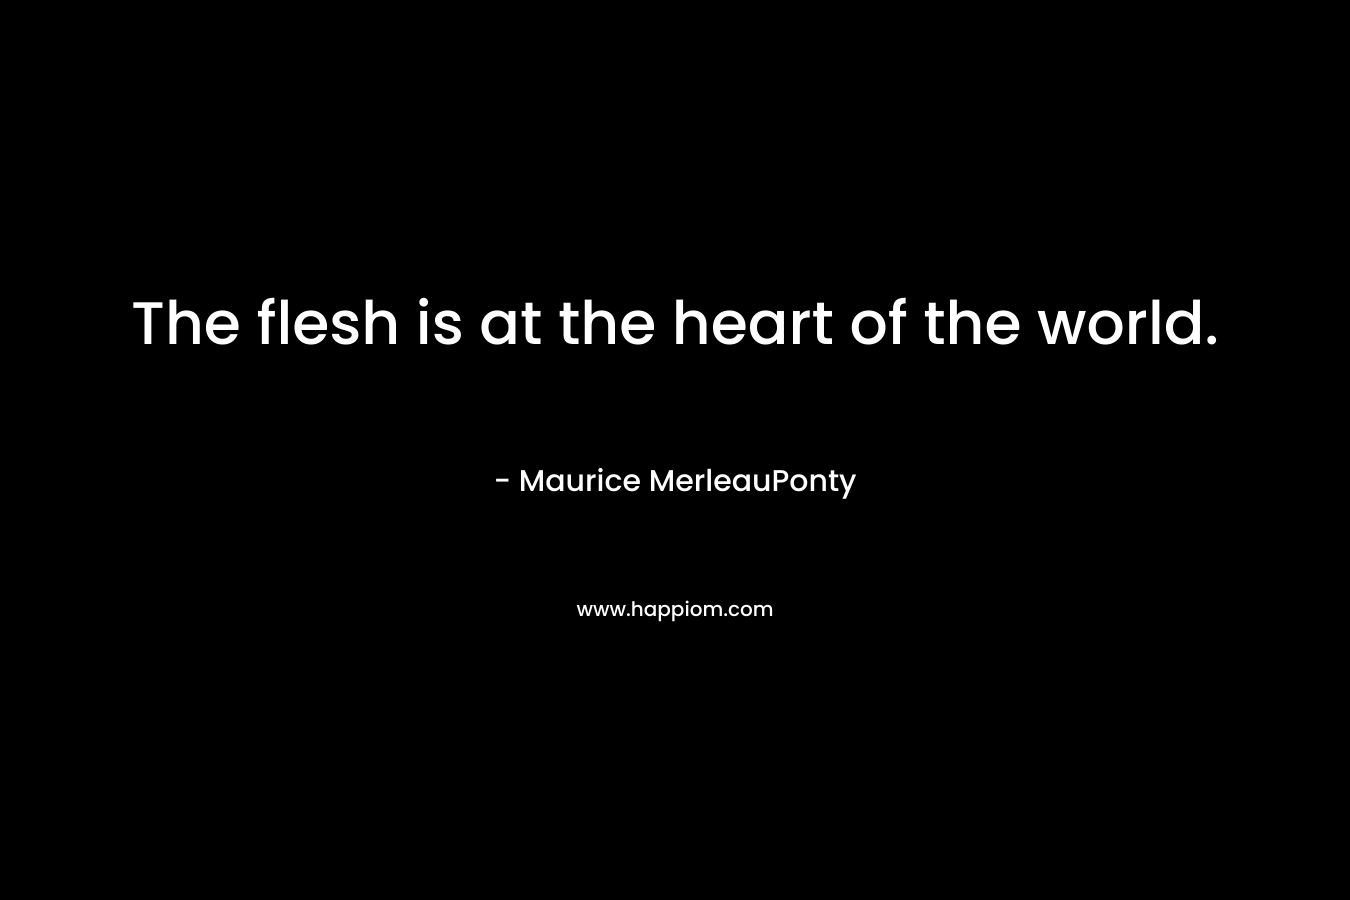 The flesh is at the heart of the world.